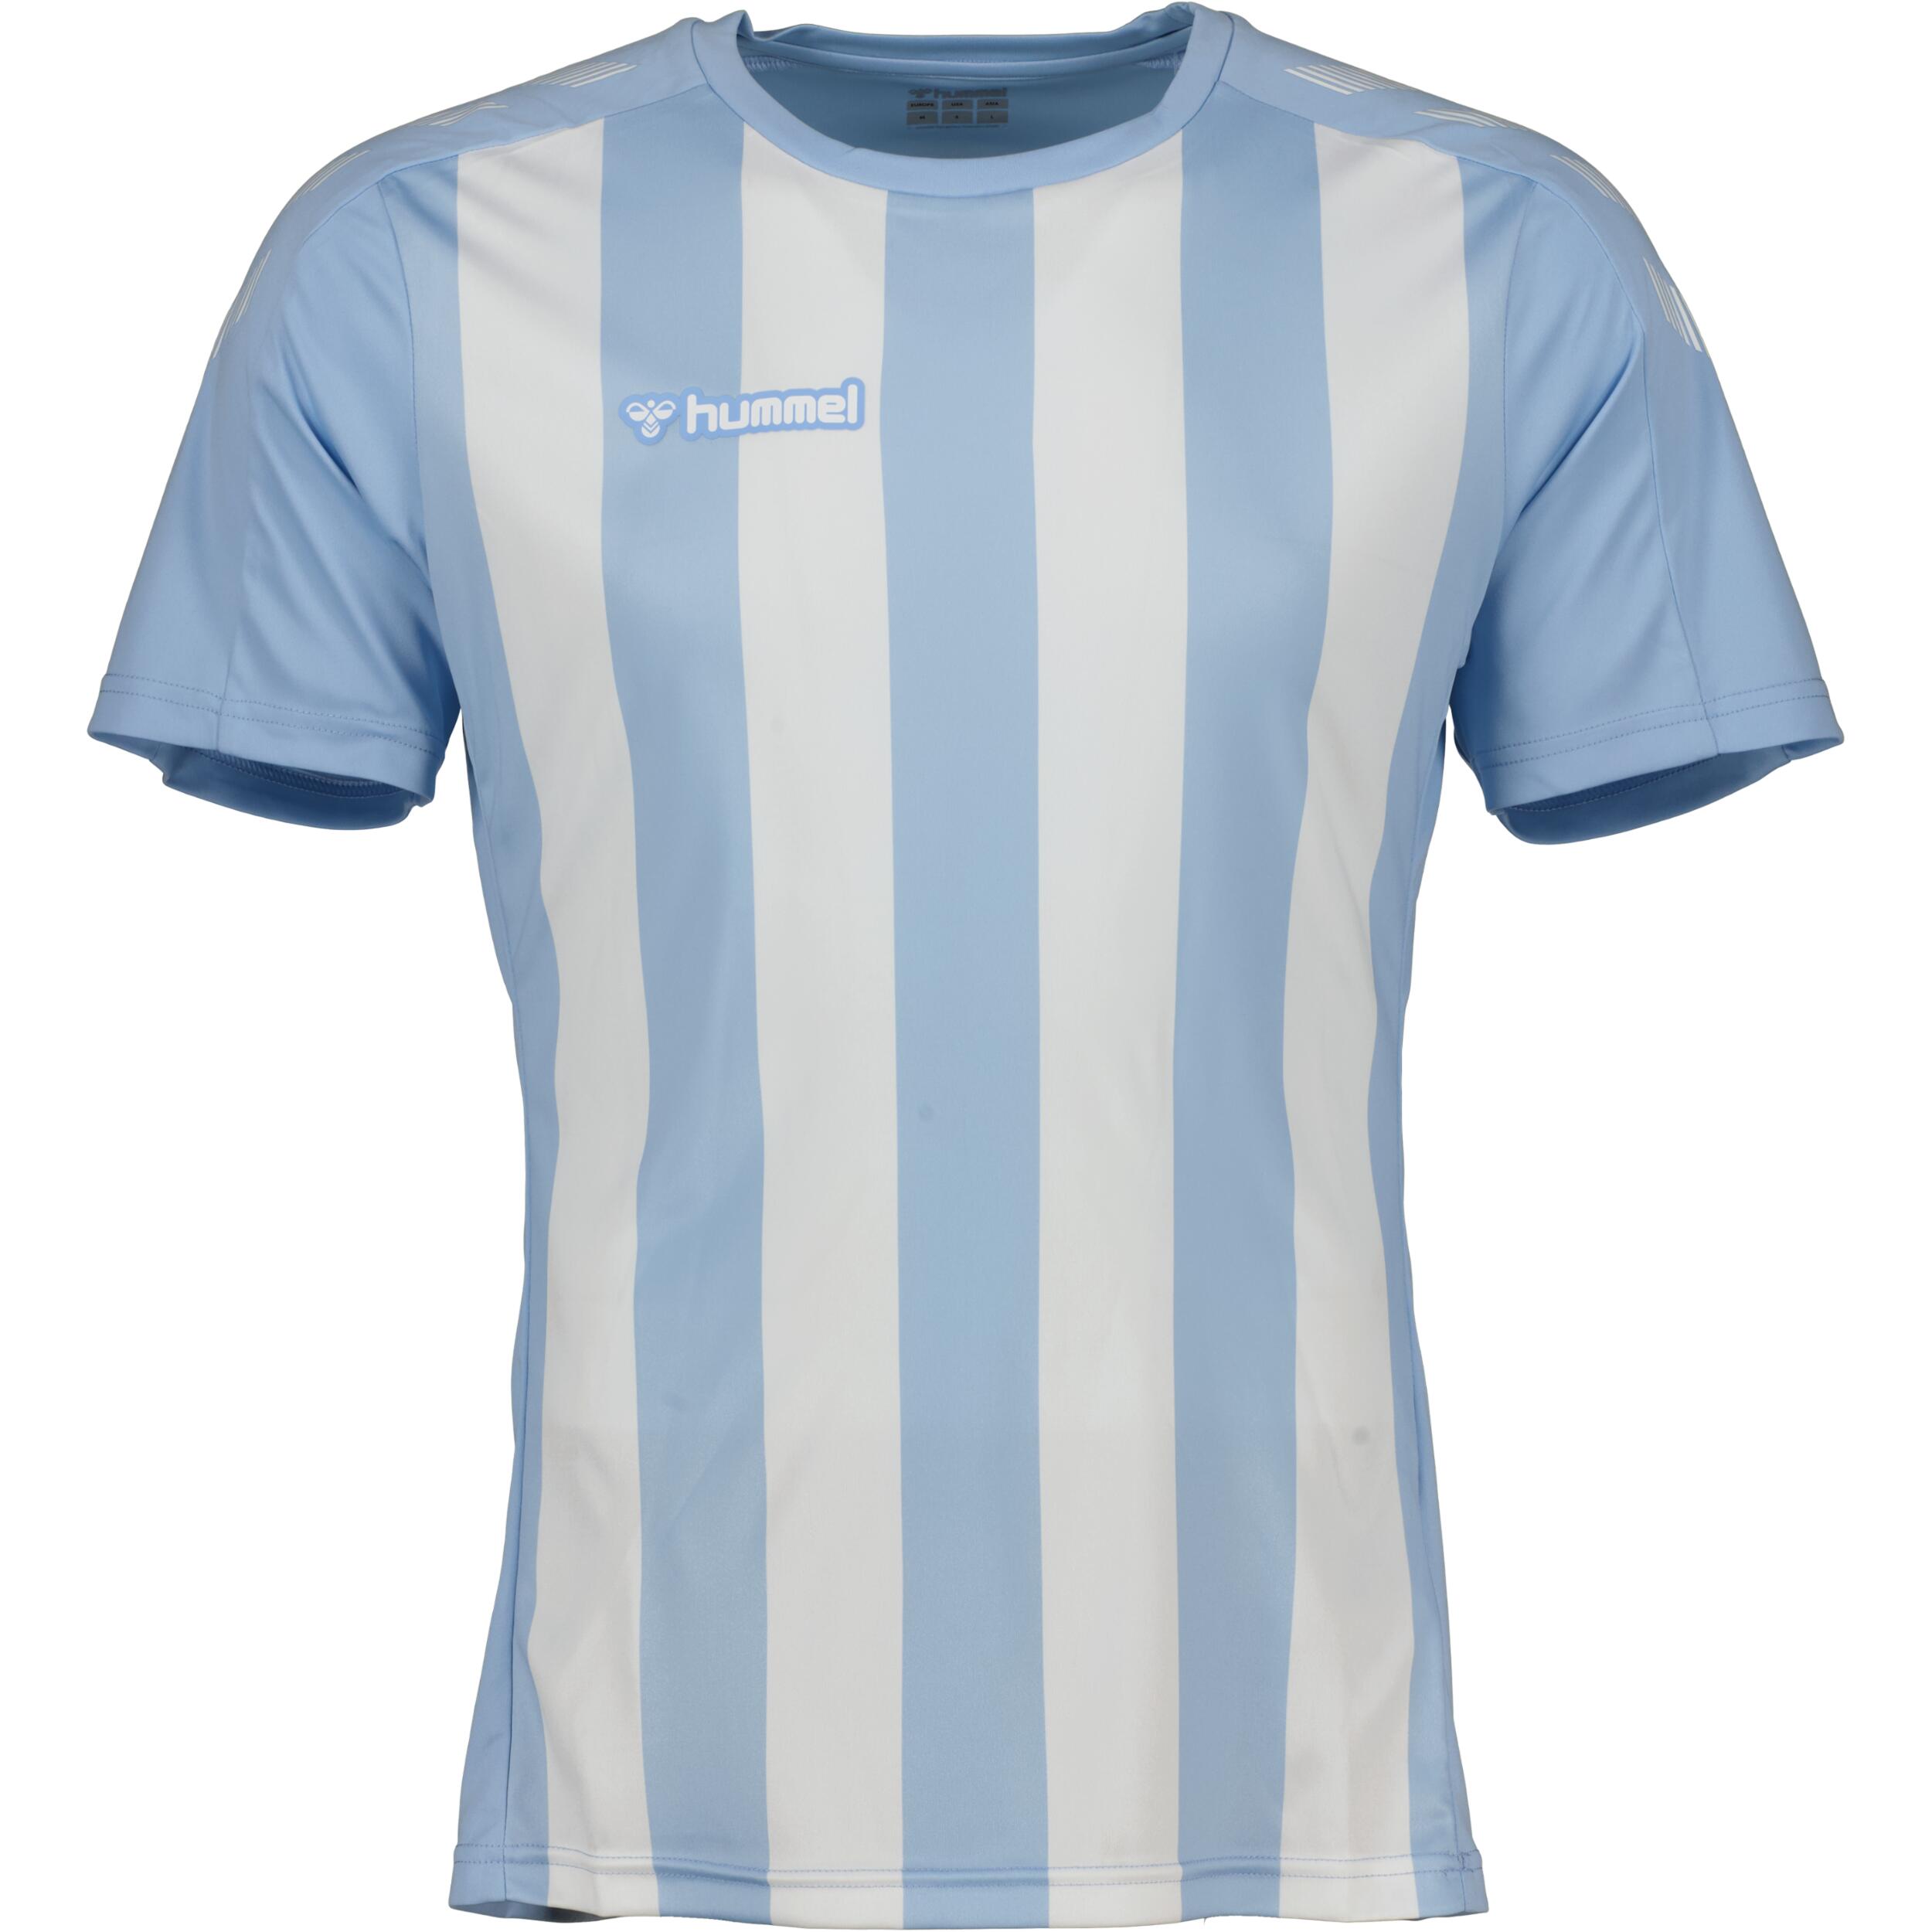 Stripe jersey for men, great for football, in argentina blue/white 1/3